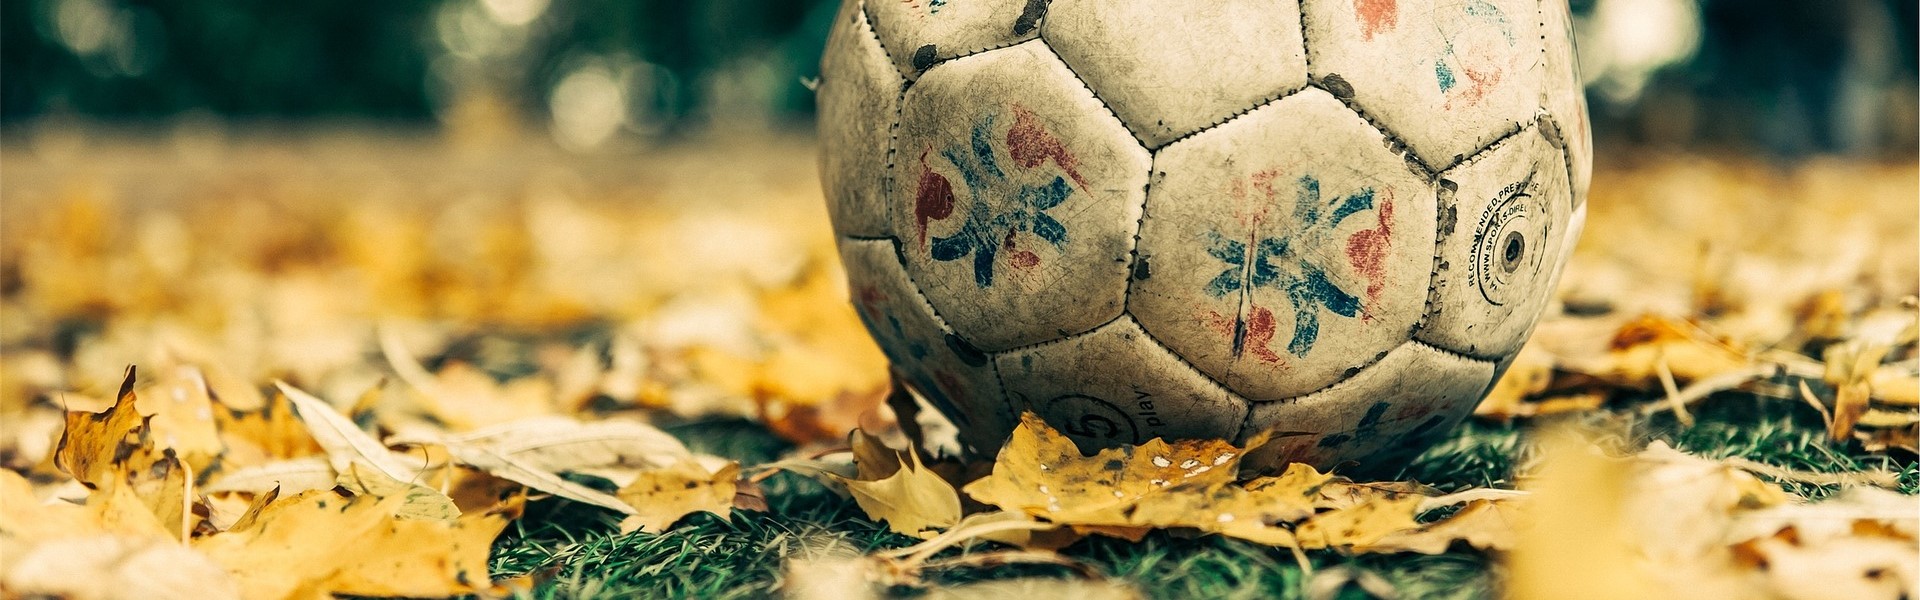 soccer ball around fall leaves